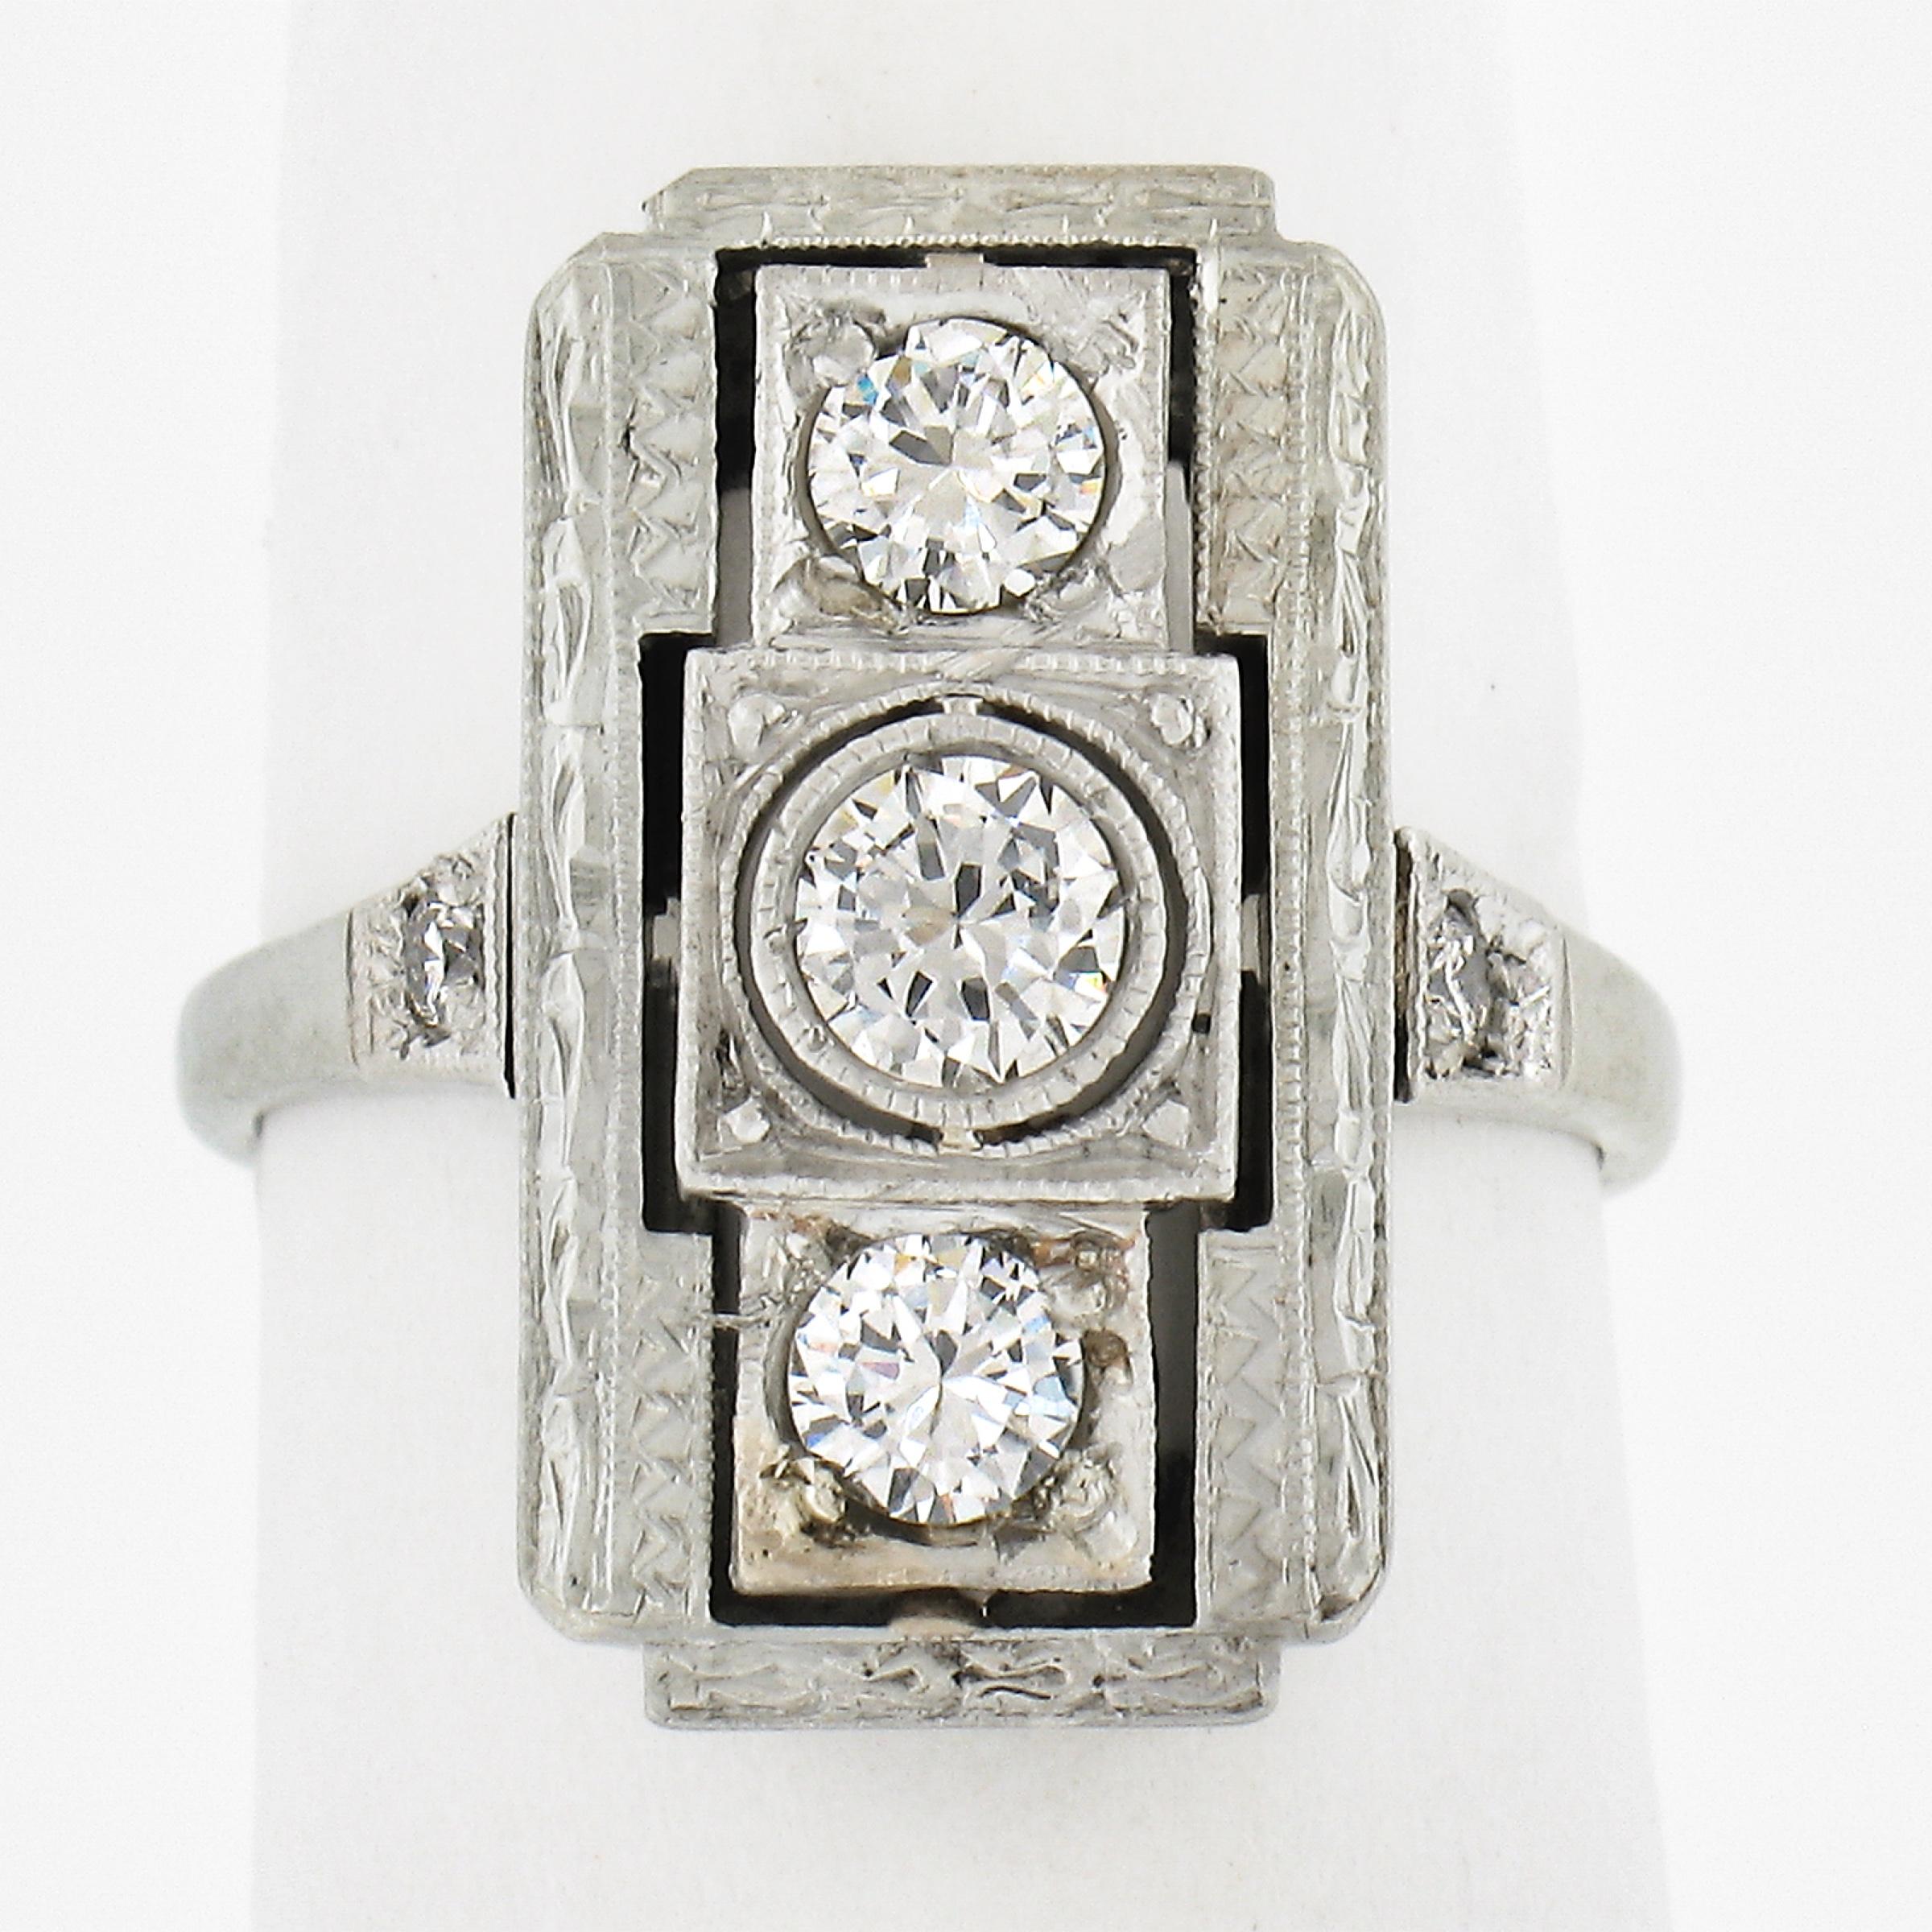 --Stone(s):--
(5) Natural Genuine Diamonds - Old Cut - Bezel & Pave Set - VS1/VS2 Clarity - G-I Color - 0.43ctw (approx.)

Material: Solid 18k White Gold
Weight: 3.76 Grams
Ring Size: 4.0 (Fitted on a finger. We can custom size this ring - Please